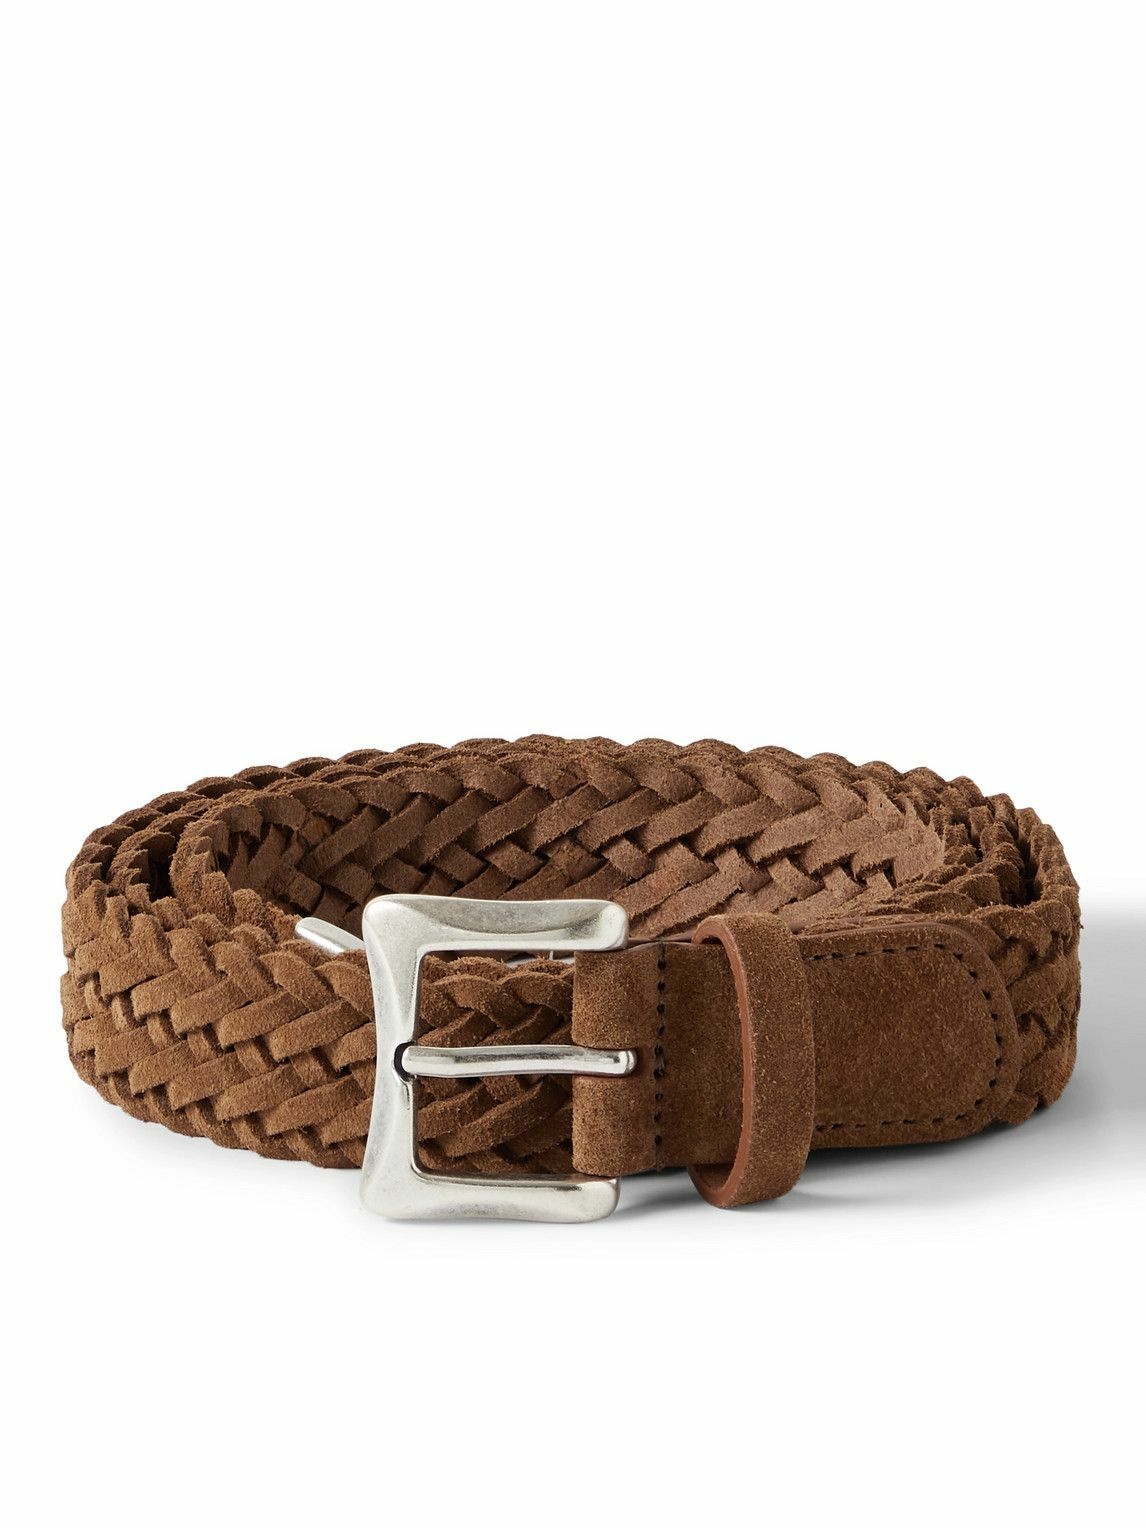 Photo: Anderson's - Woven Suede Belt - Brown